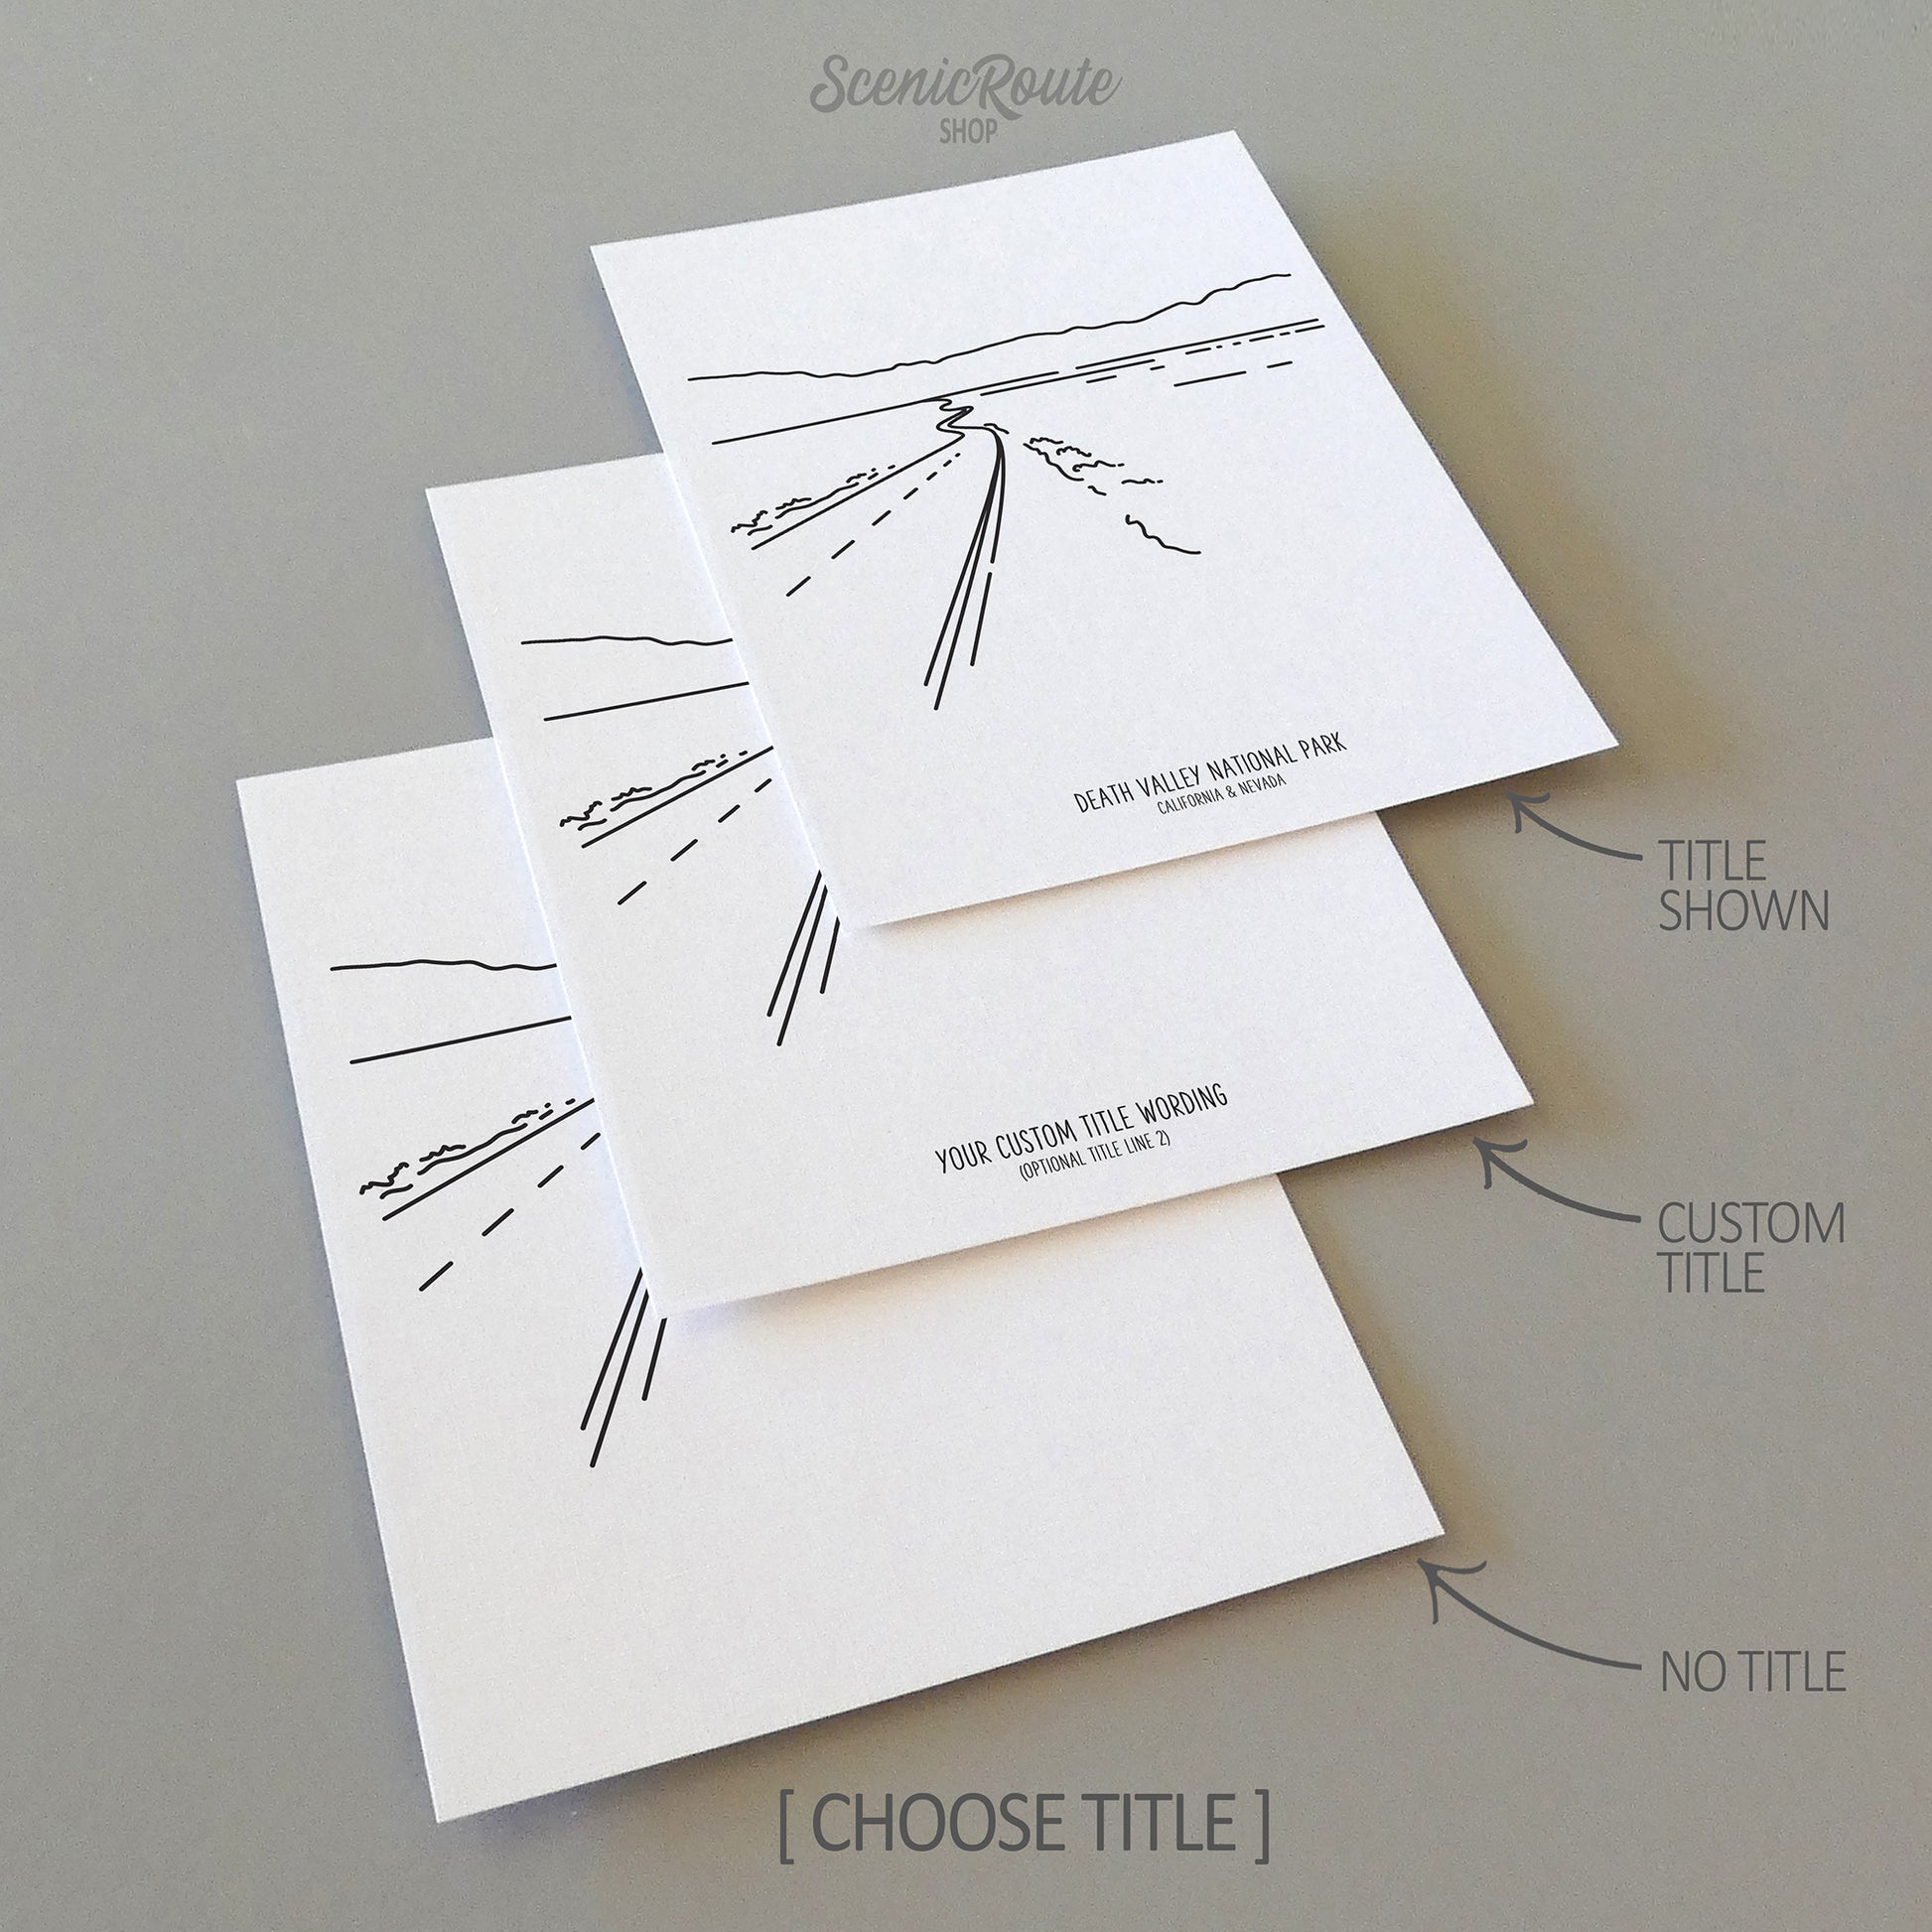 Three line art drawings of Death Valley National Park on white linen paper with a gray background. The pieces are shown with title options that can be chosen and personalized.